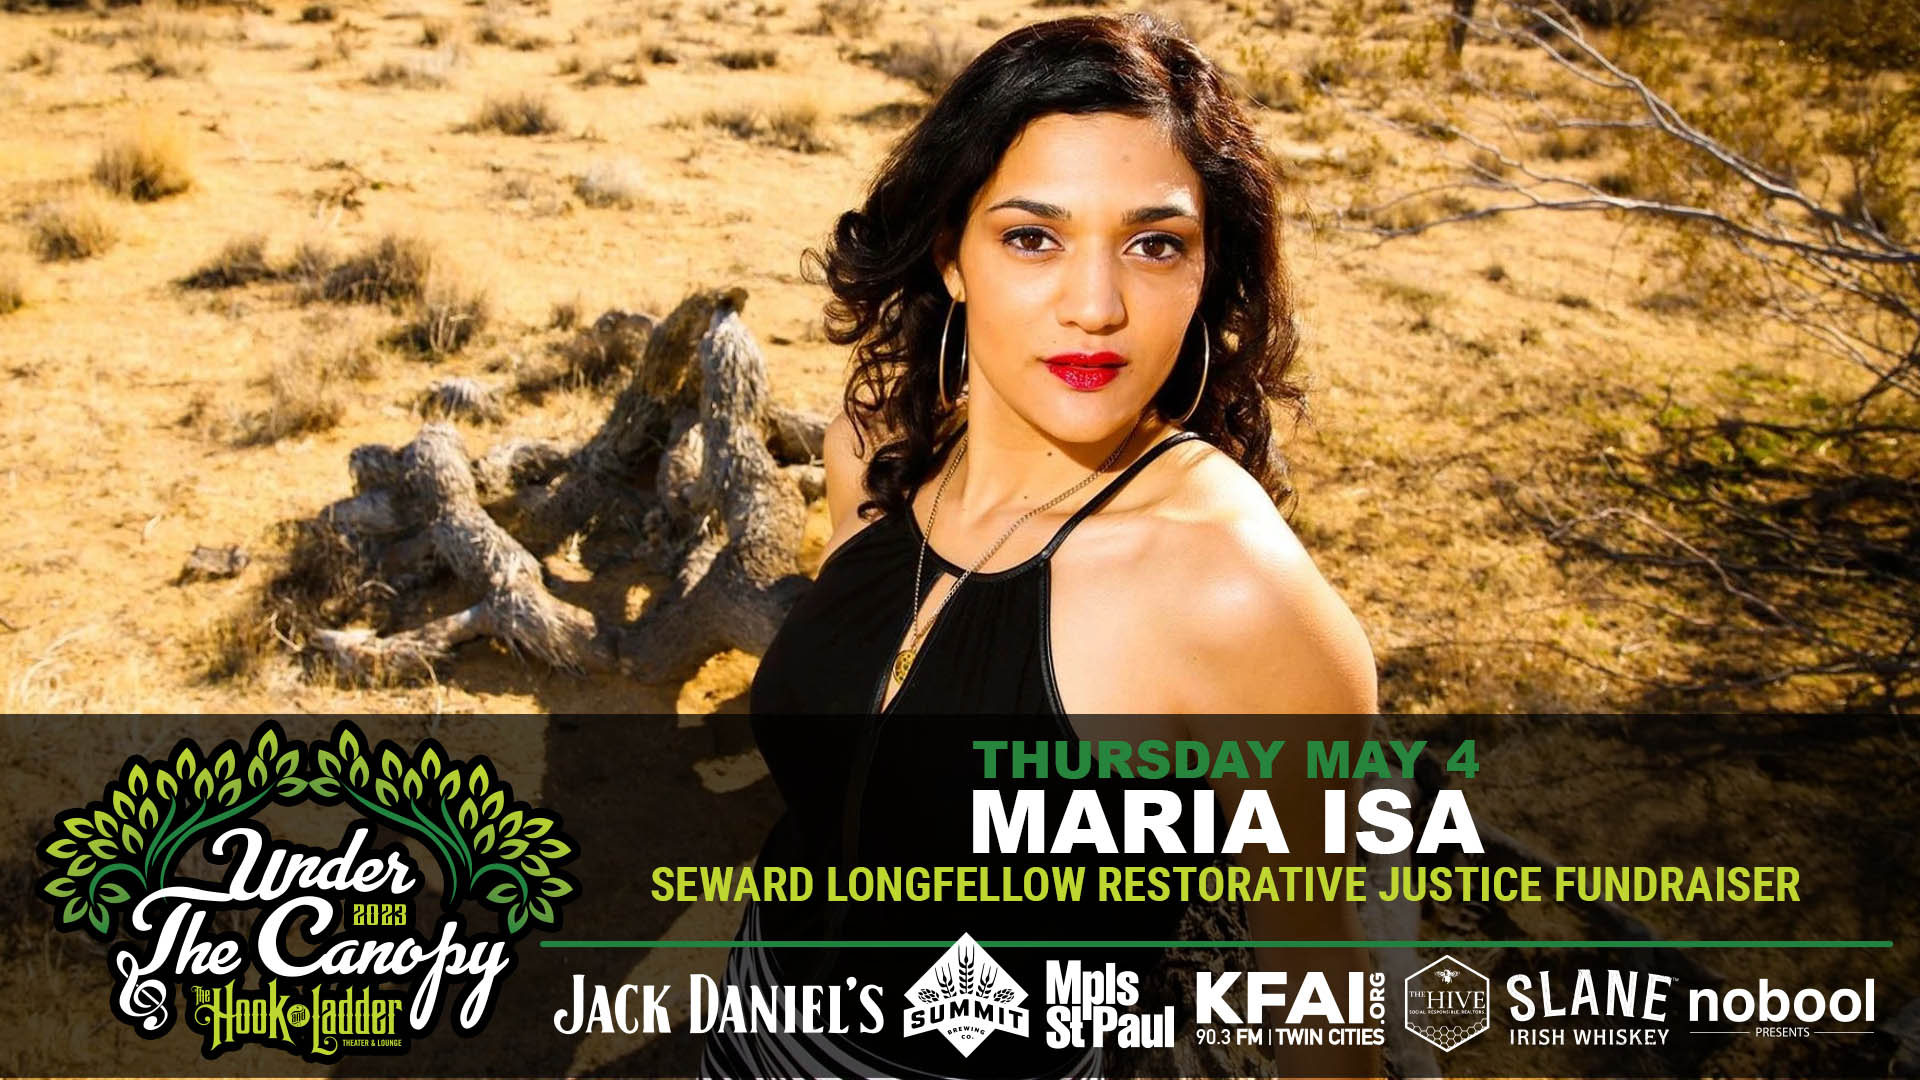 Maria Isa fundraising concert with SLRJ